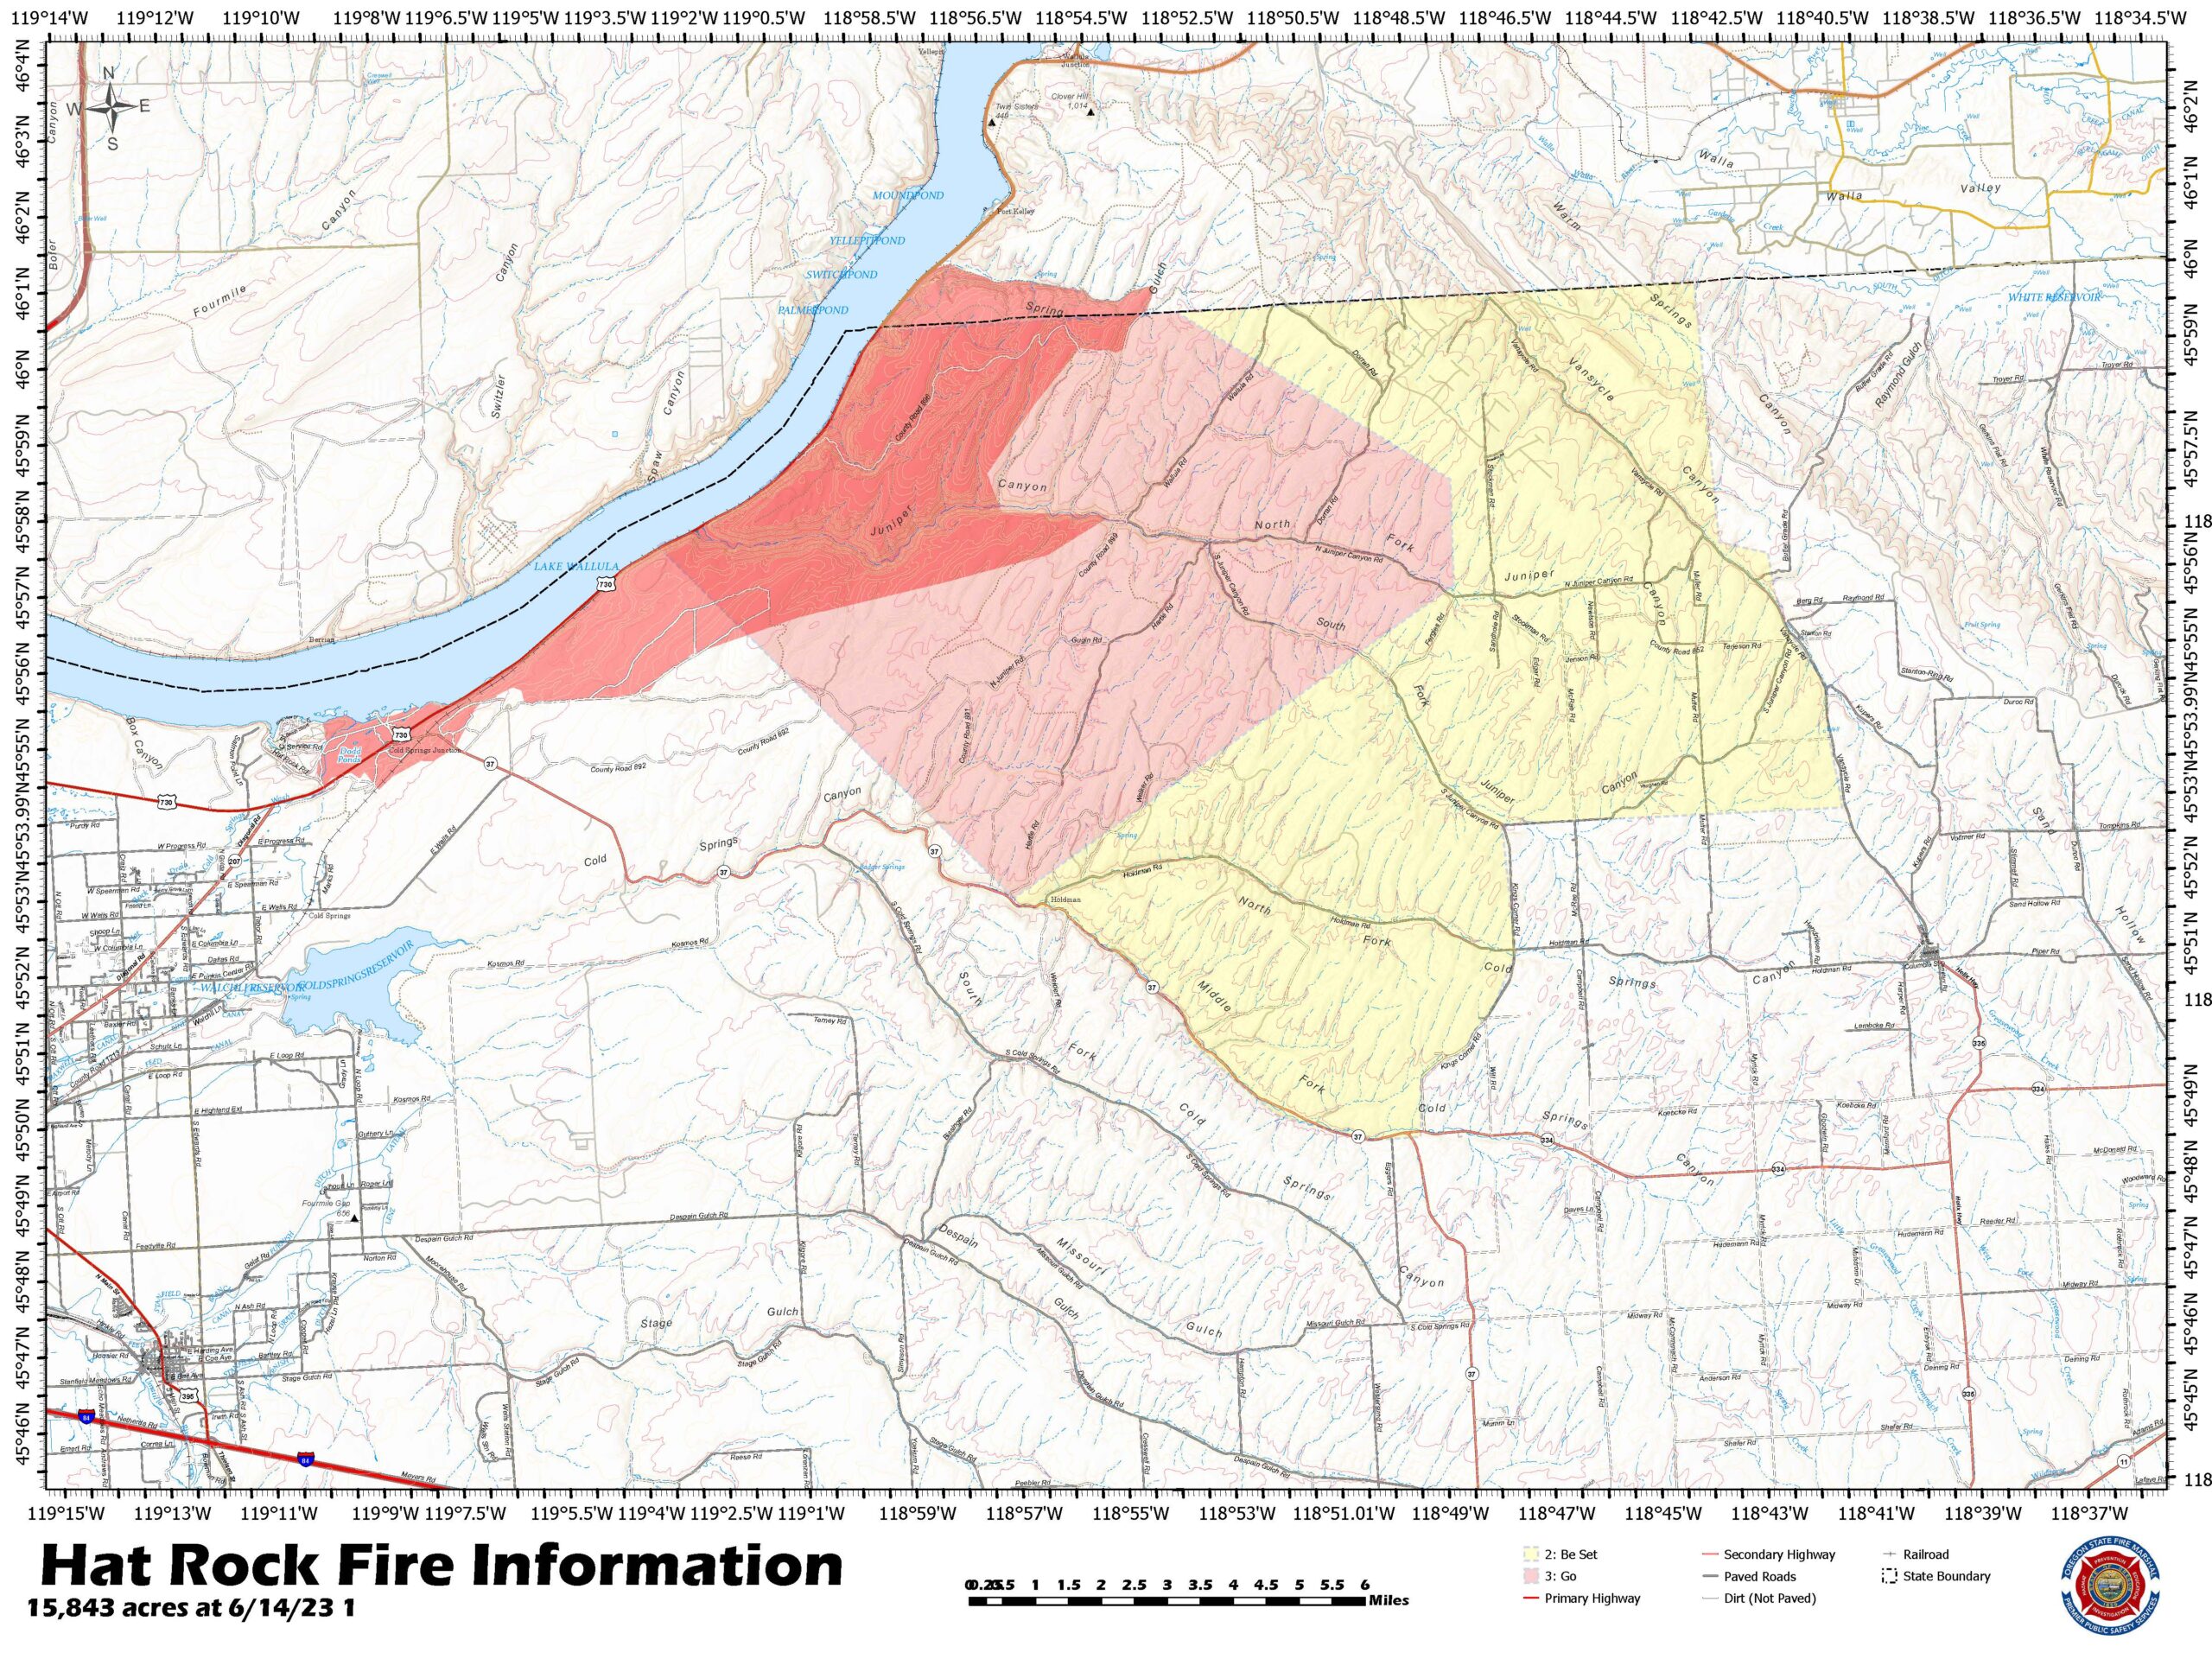 Hat Rock Fire stands at 15,843 acres, Mount Hebron Fire mapped at 370